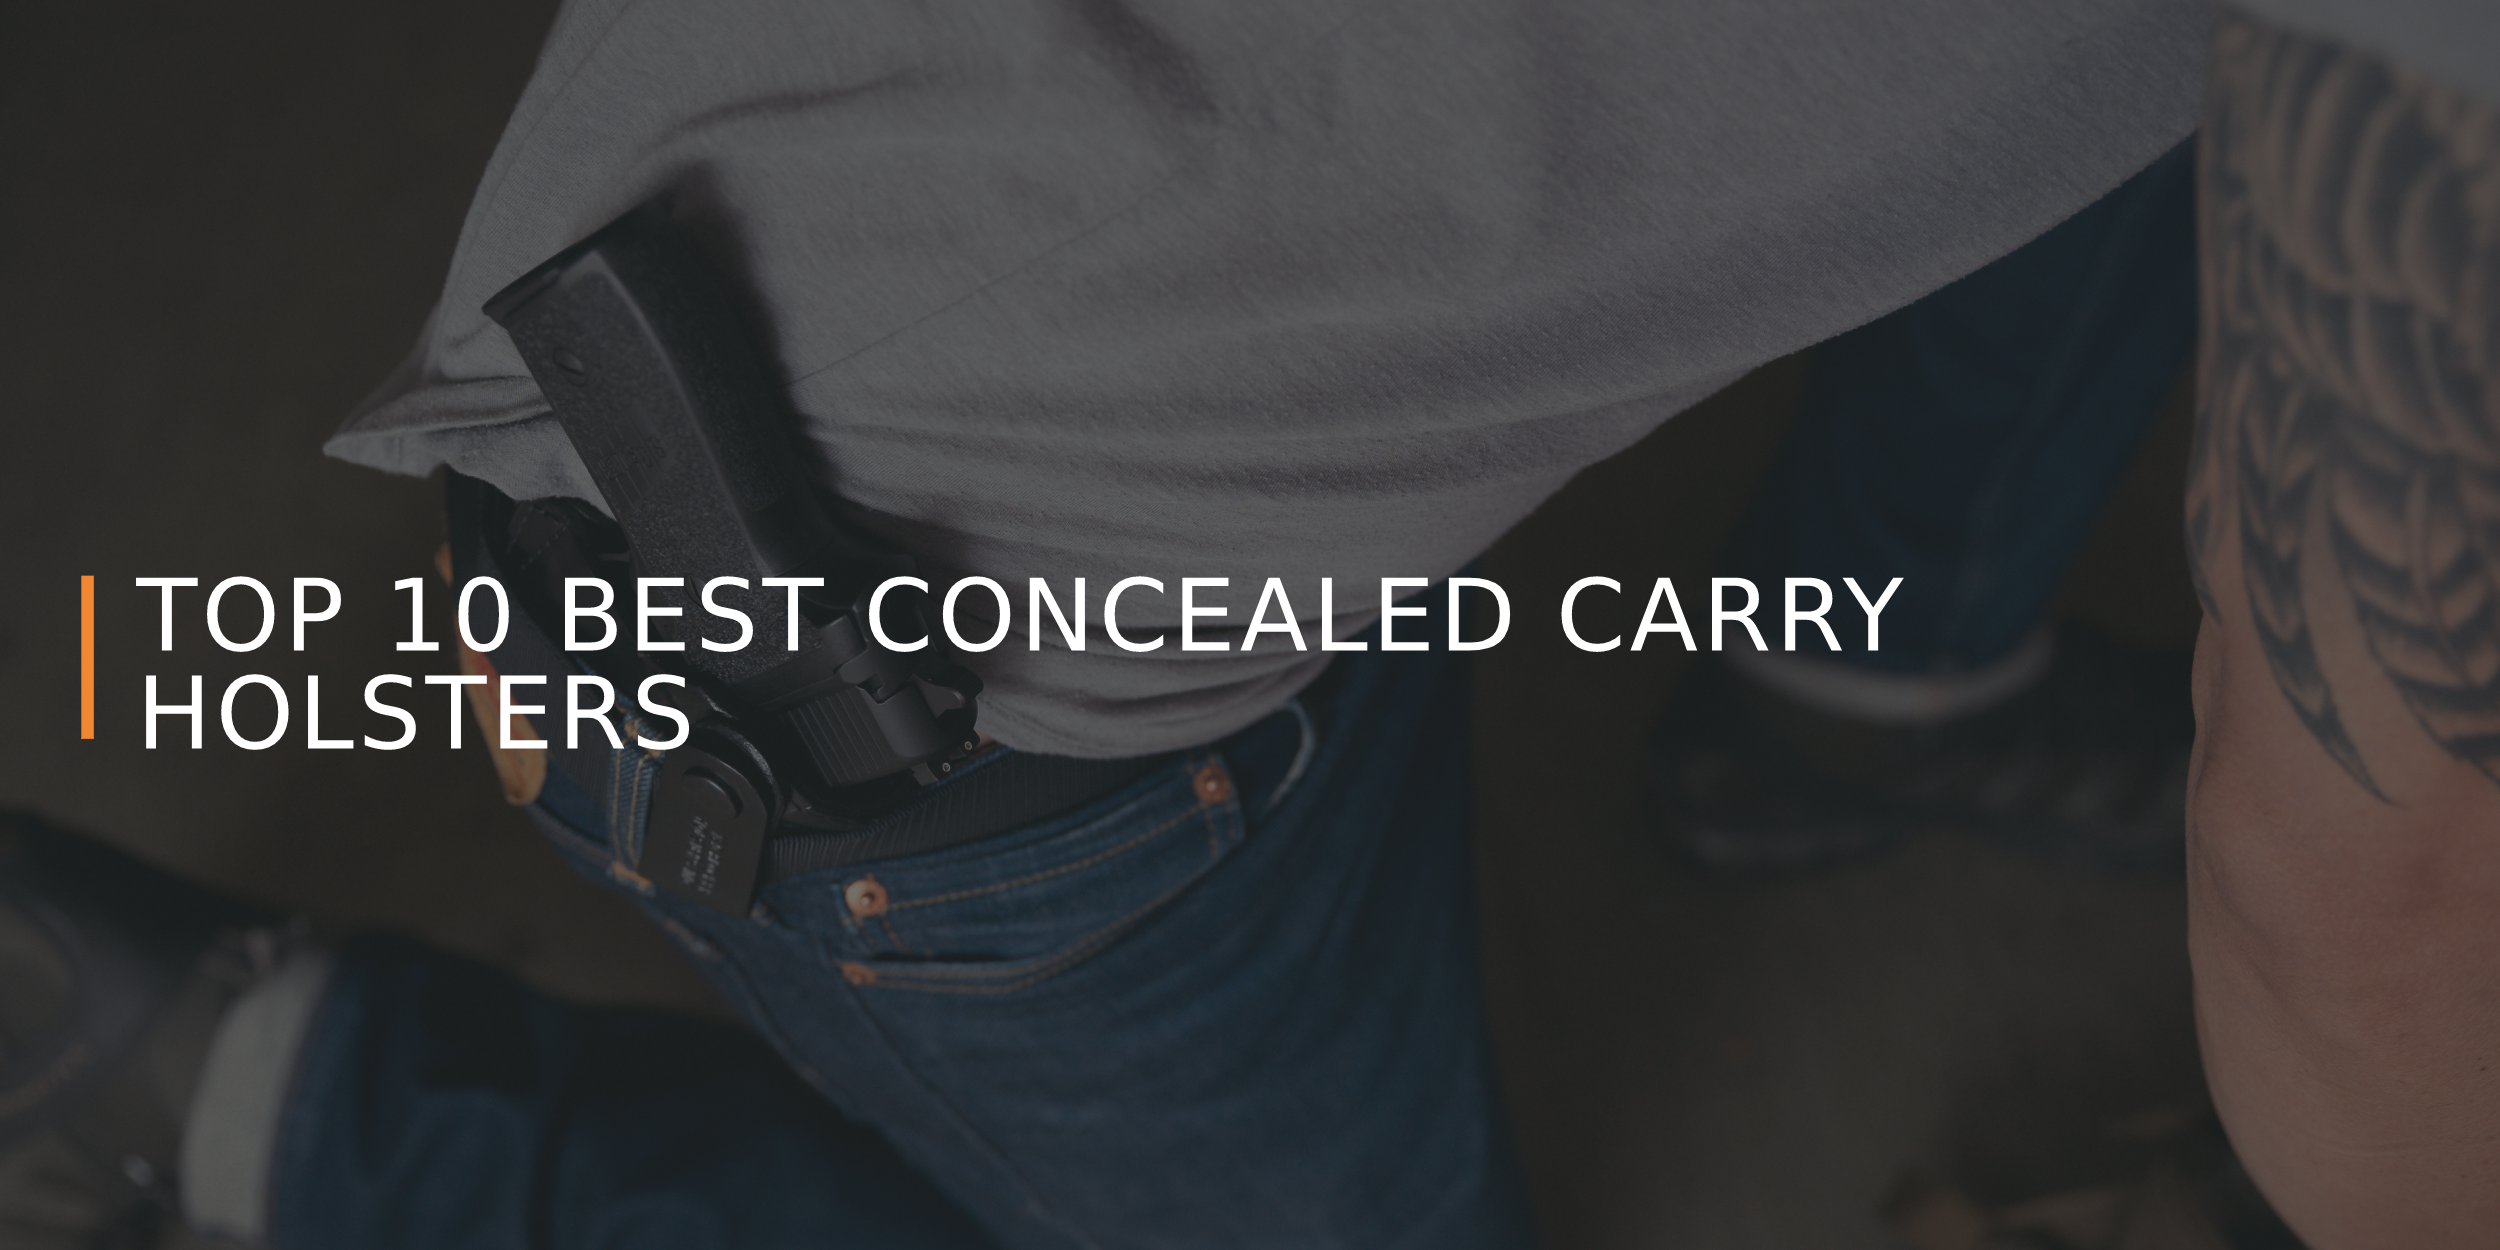 Top 10 Best Concealed Carry Holsters